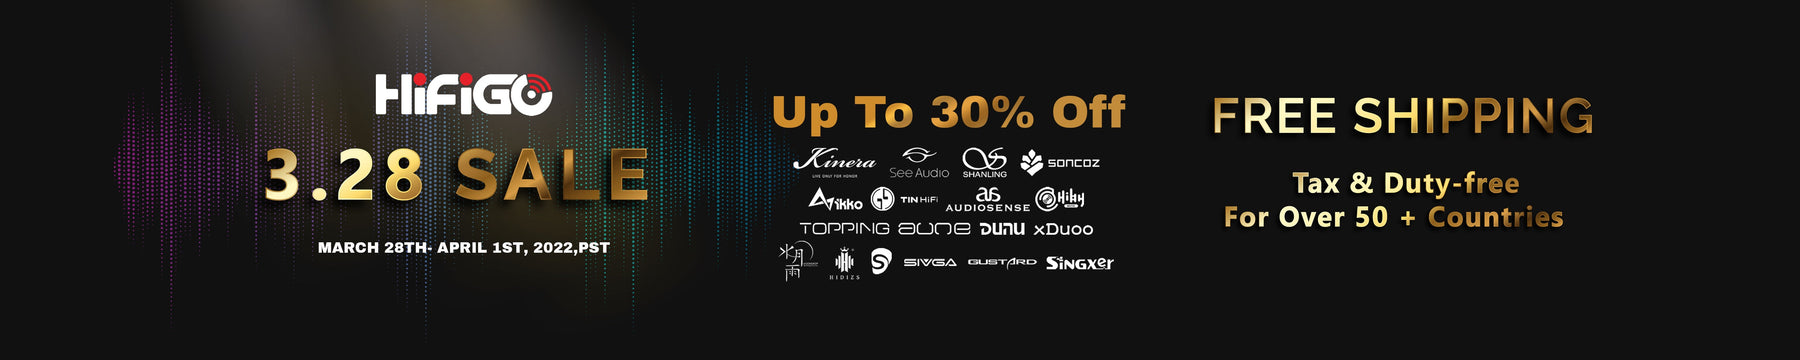 Hifigo 3.28 Sale Is Here: Crazy Deals Are Waiting For You!!!